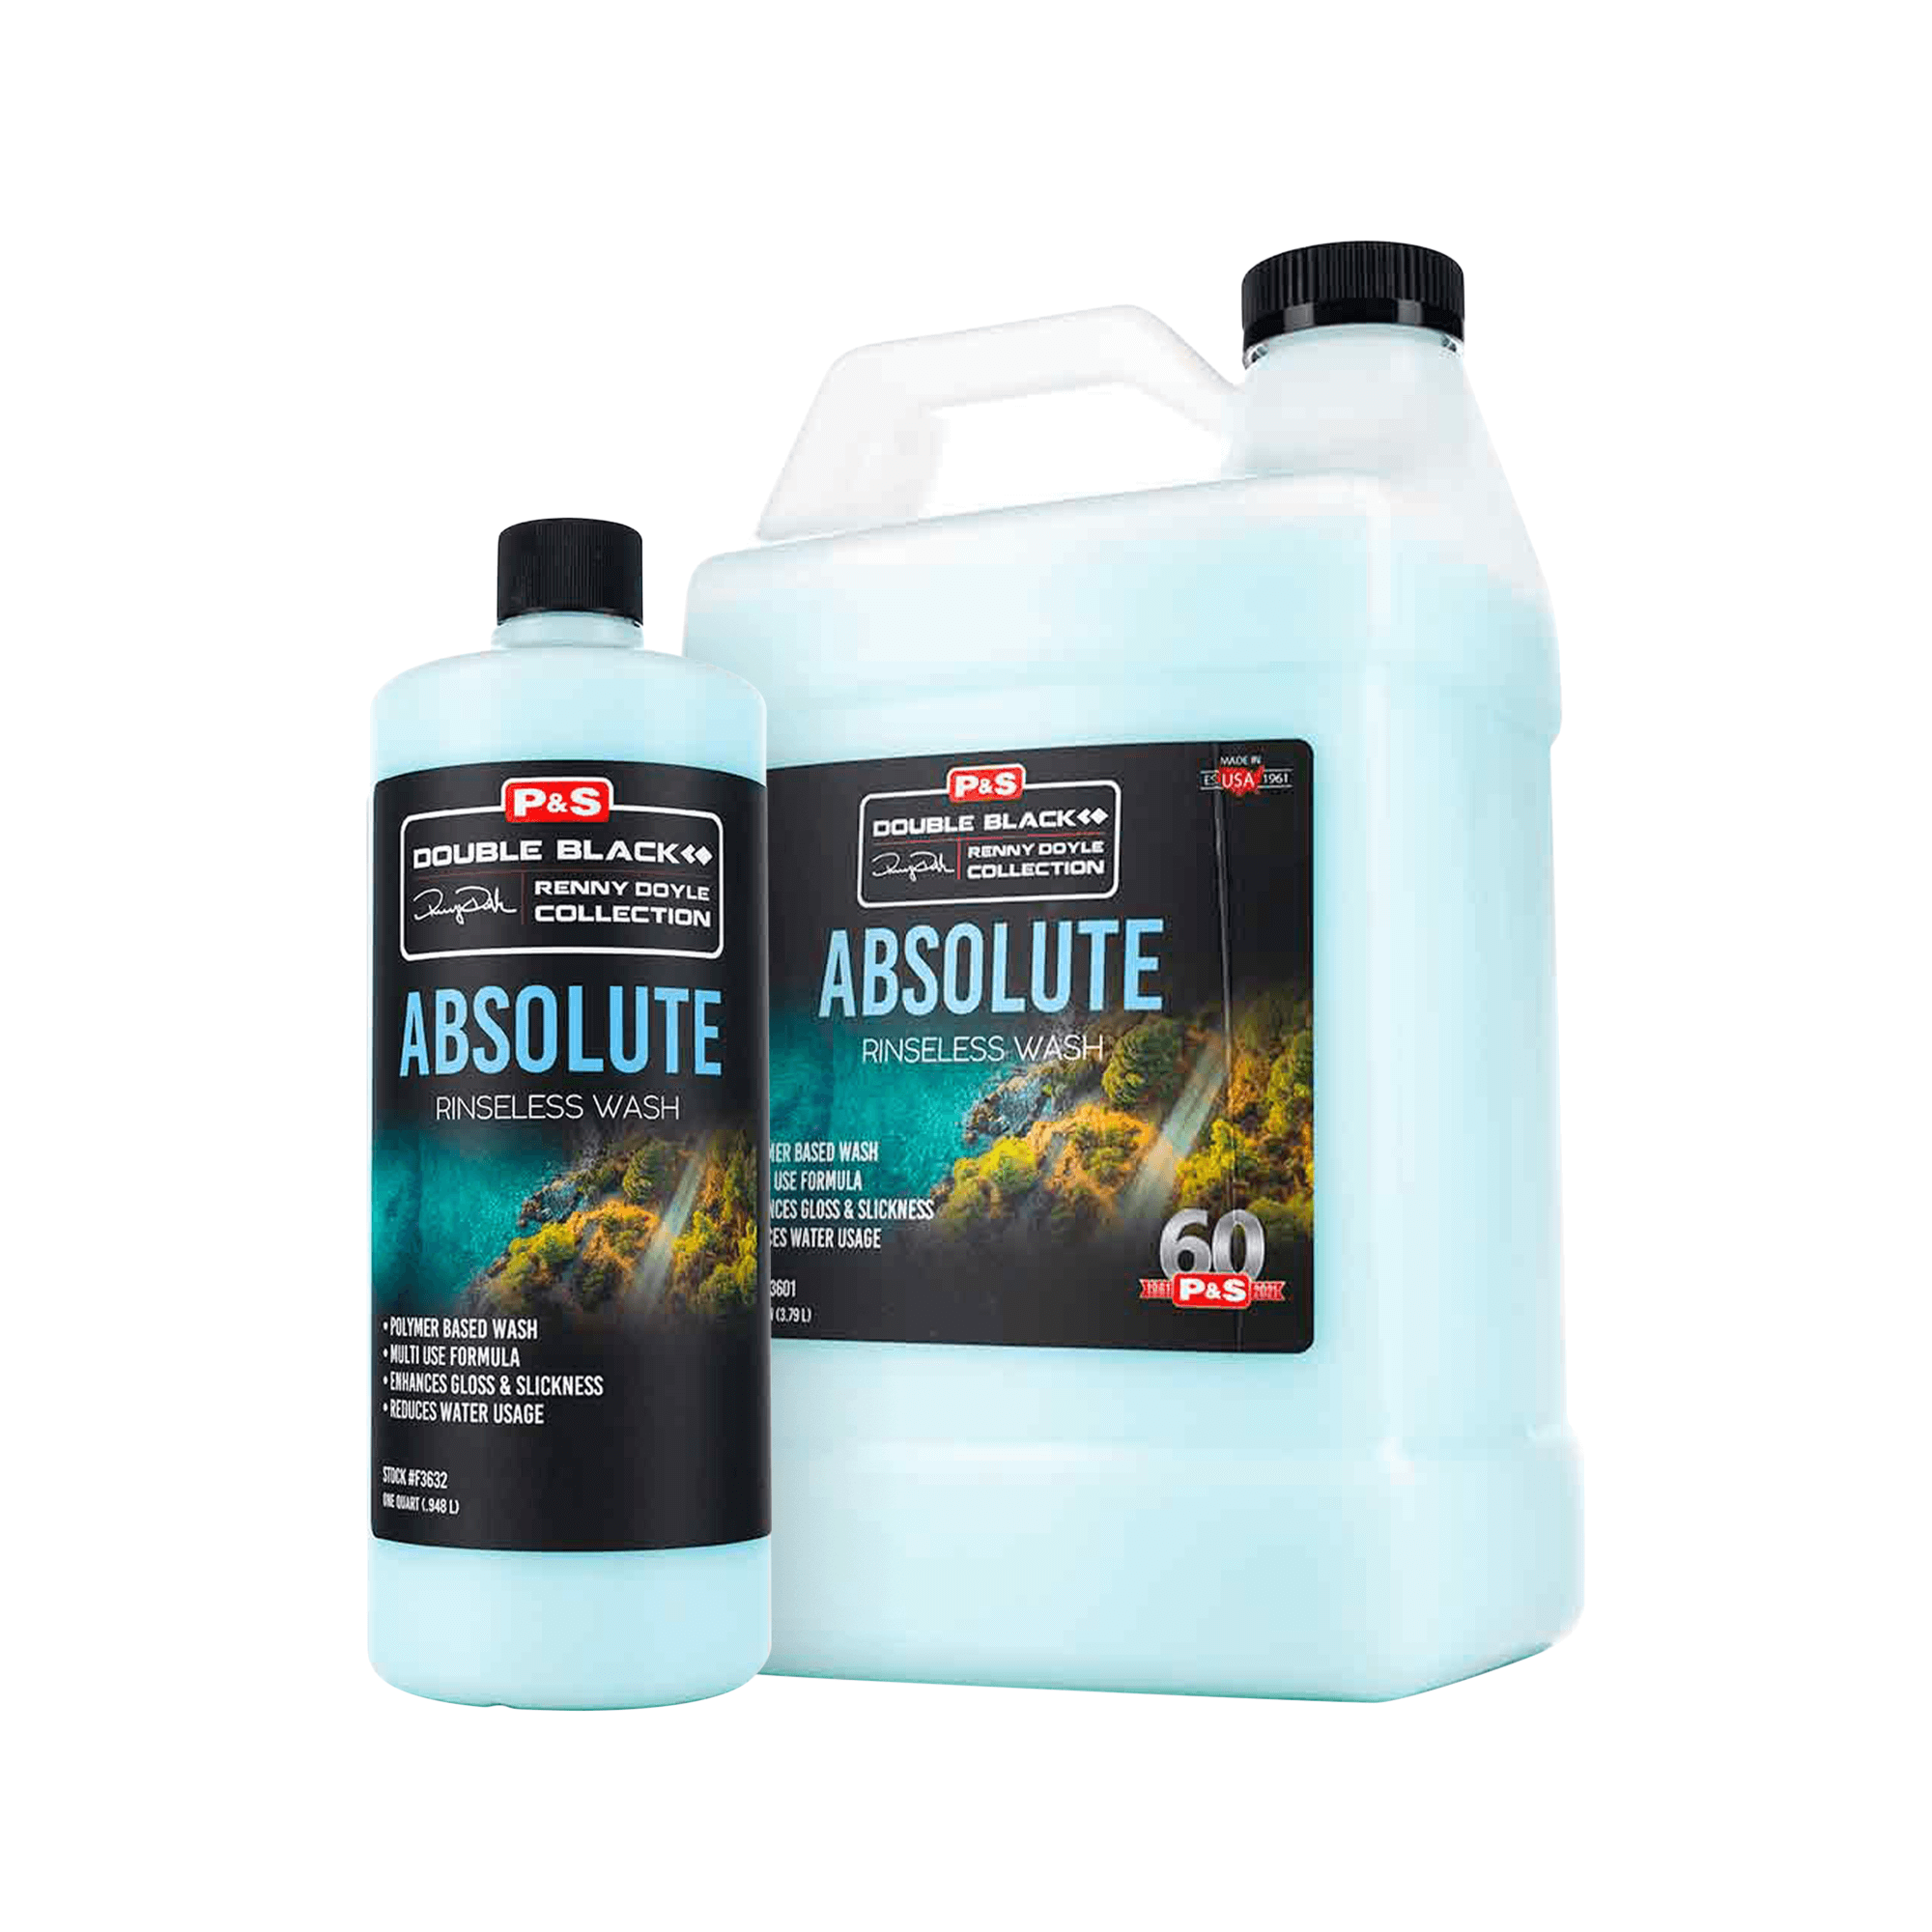 P&S - Absolute Rinseless Wash – The Rag Company Europe